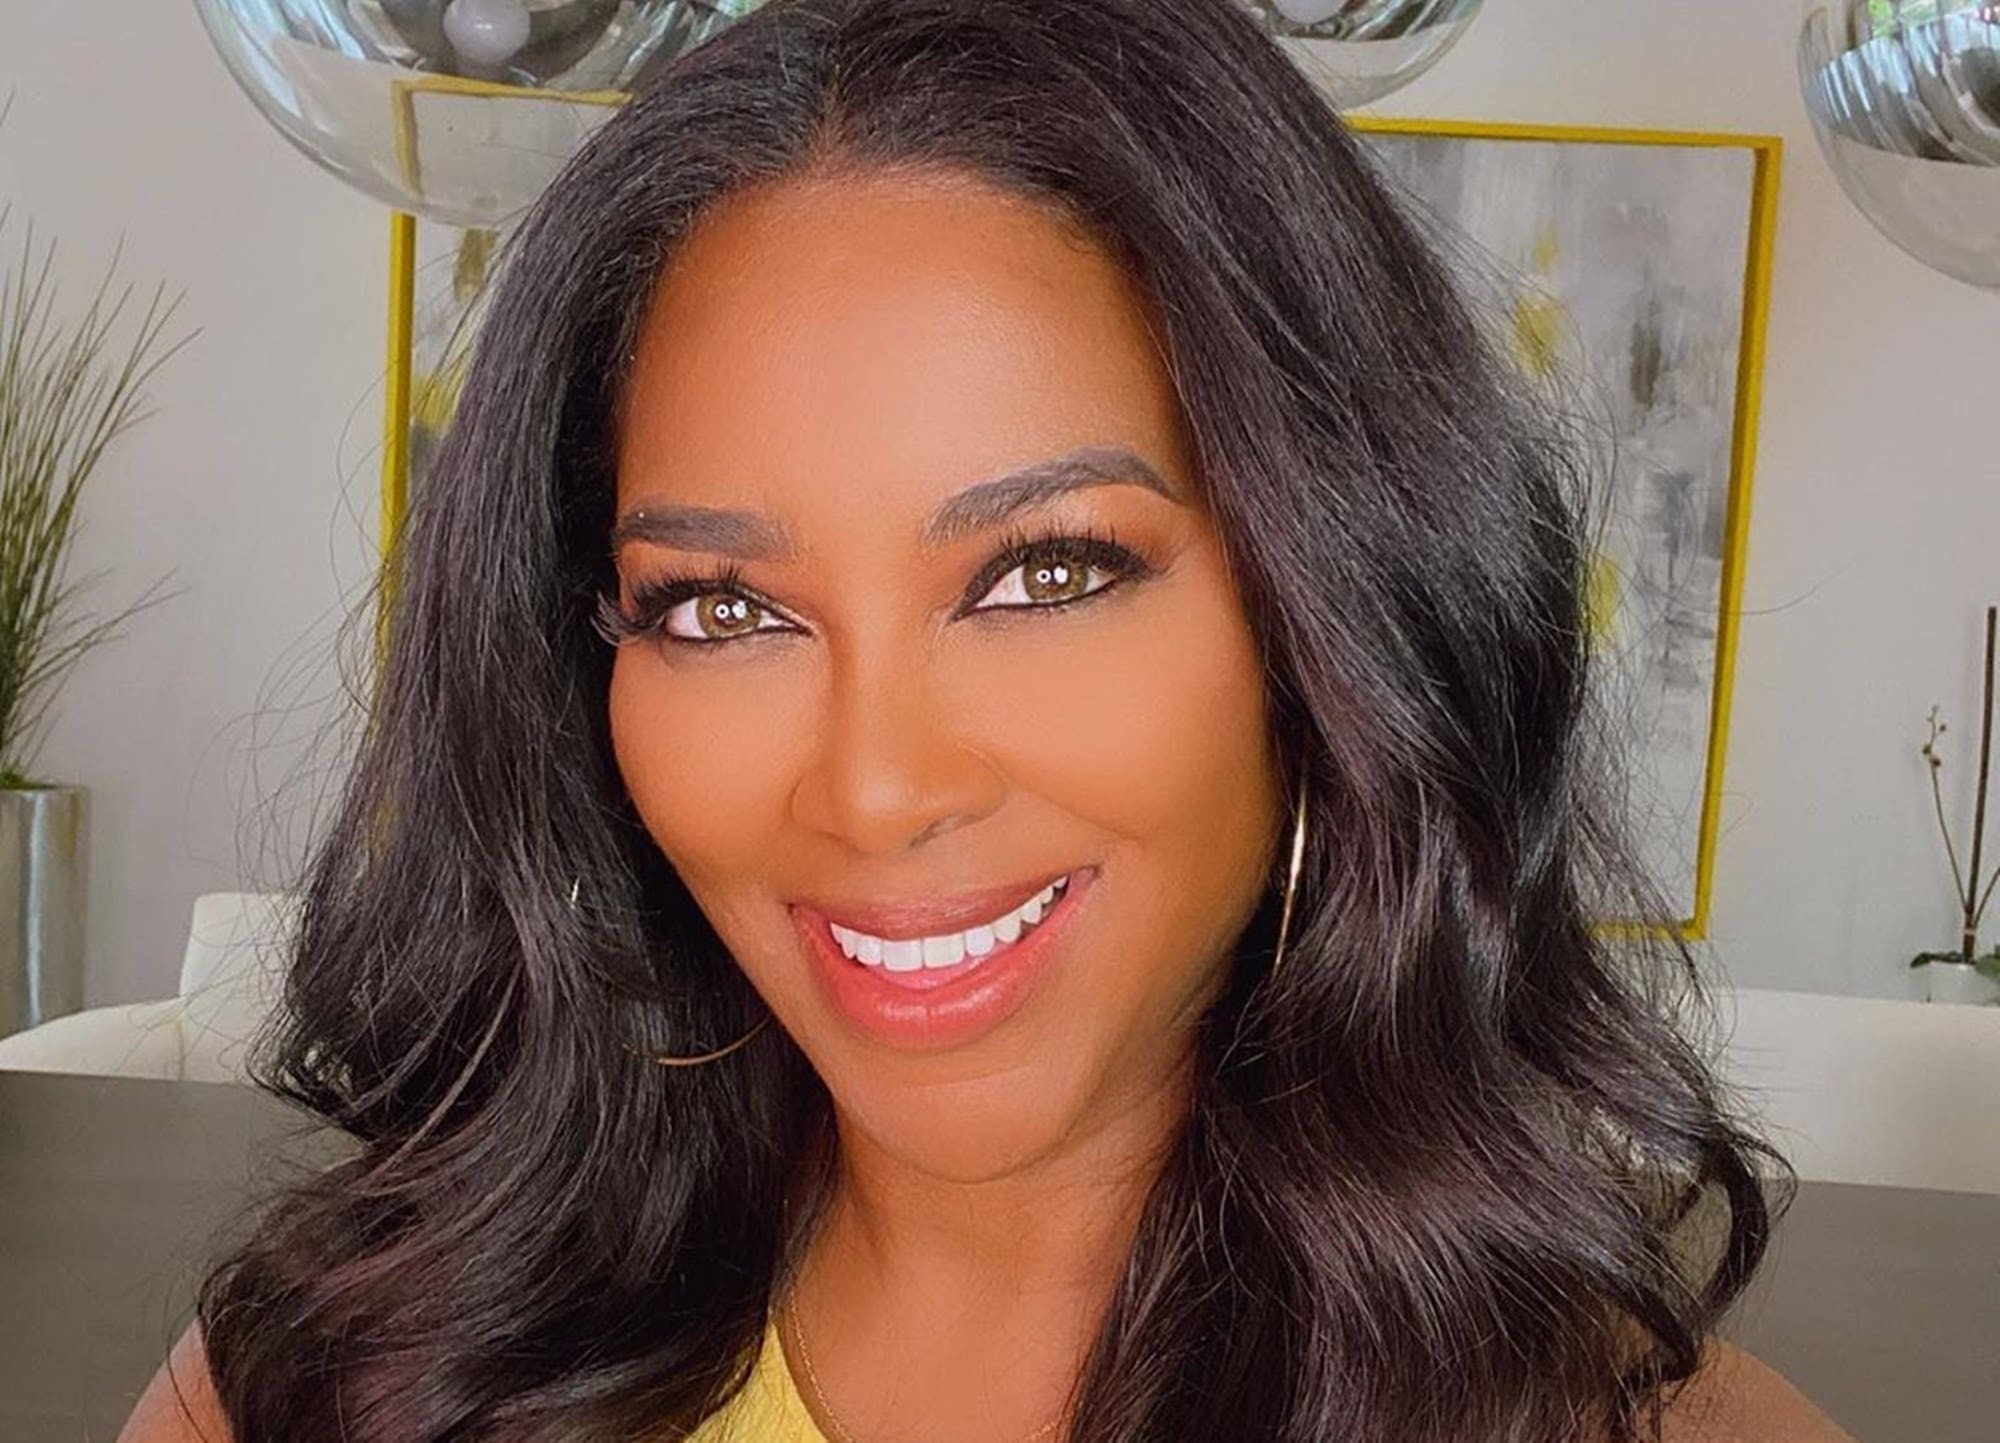 Kenya Moore's Latest Photo And Message Has Her Fans Saying That If Marc Daly Doesn't Get His Act Together, He's A 'Loser'